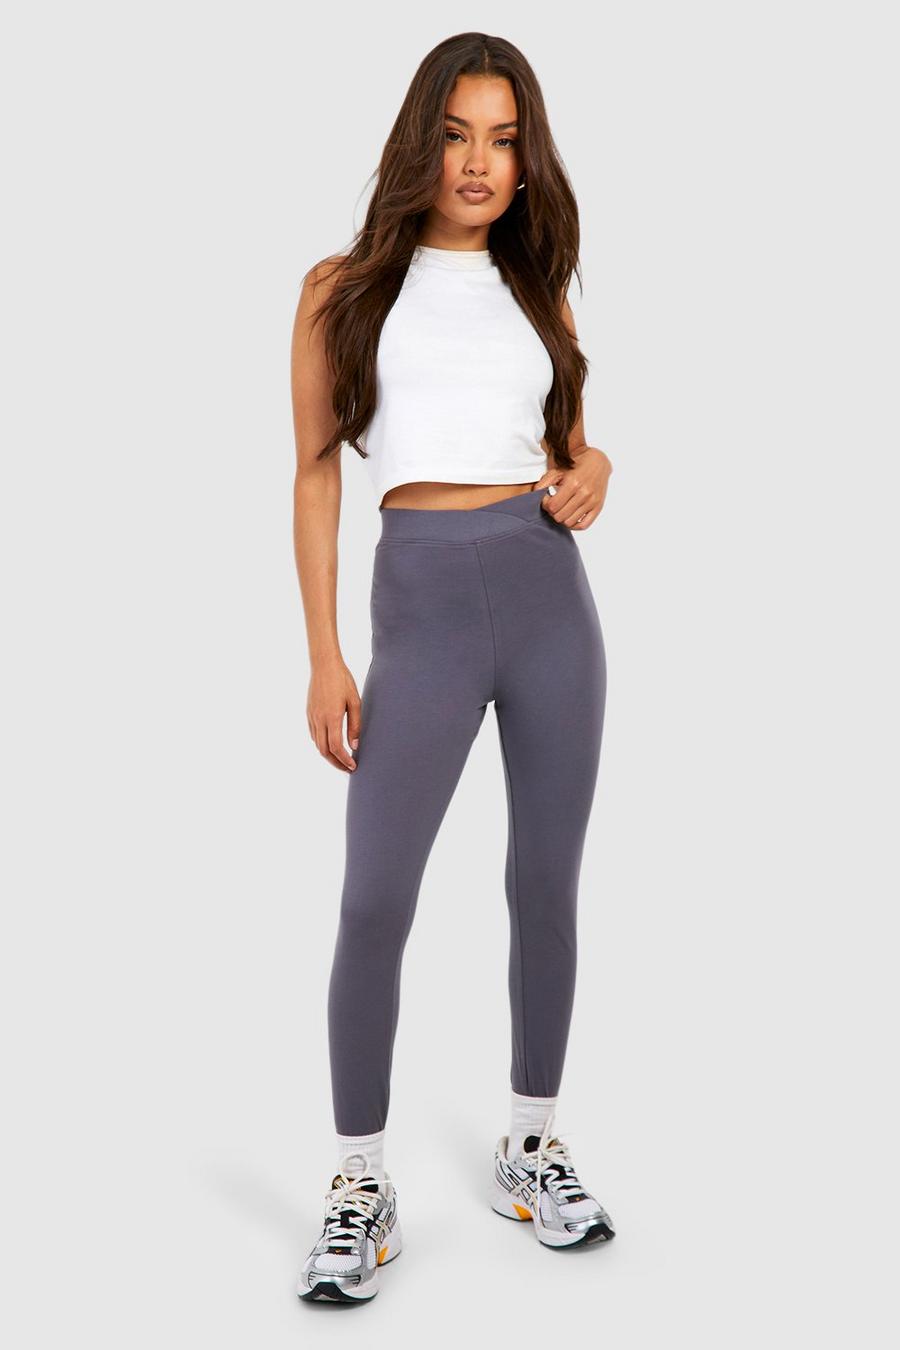 Cotton Jersey Knit Wrap High Waisted Leggings | boohoo